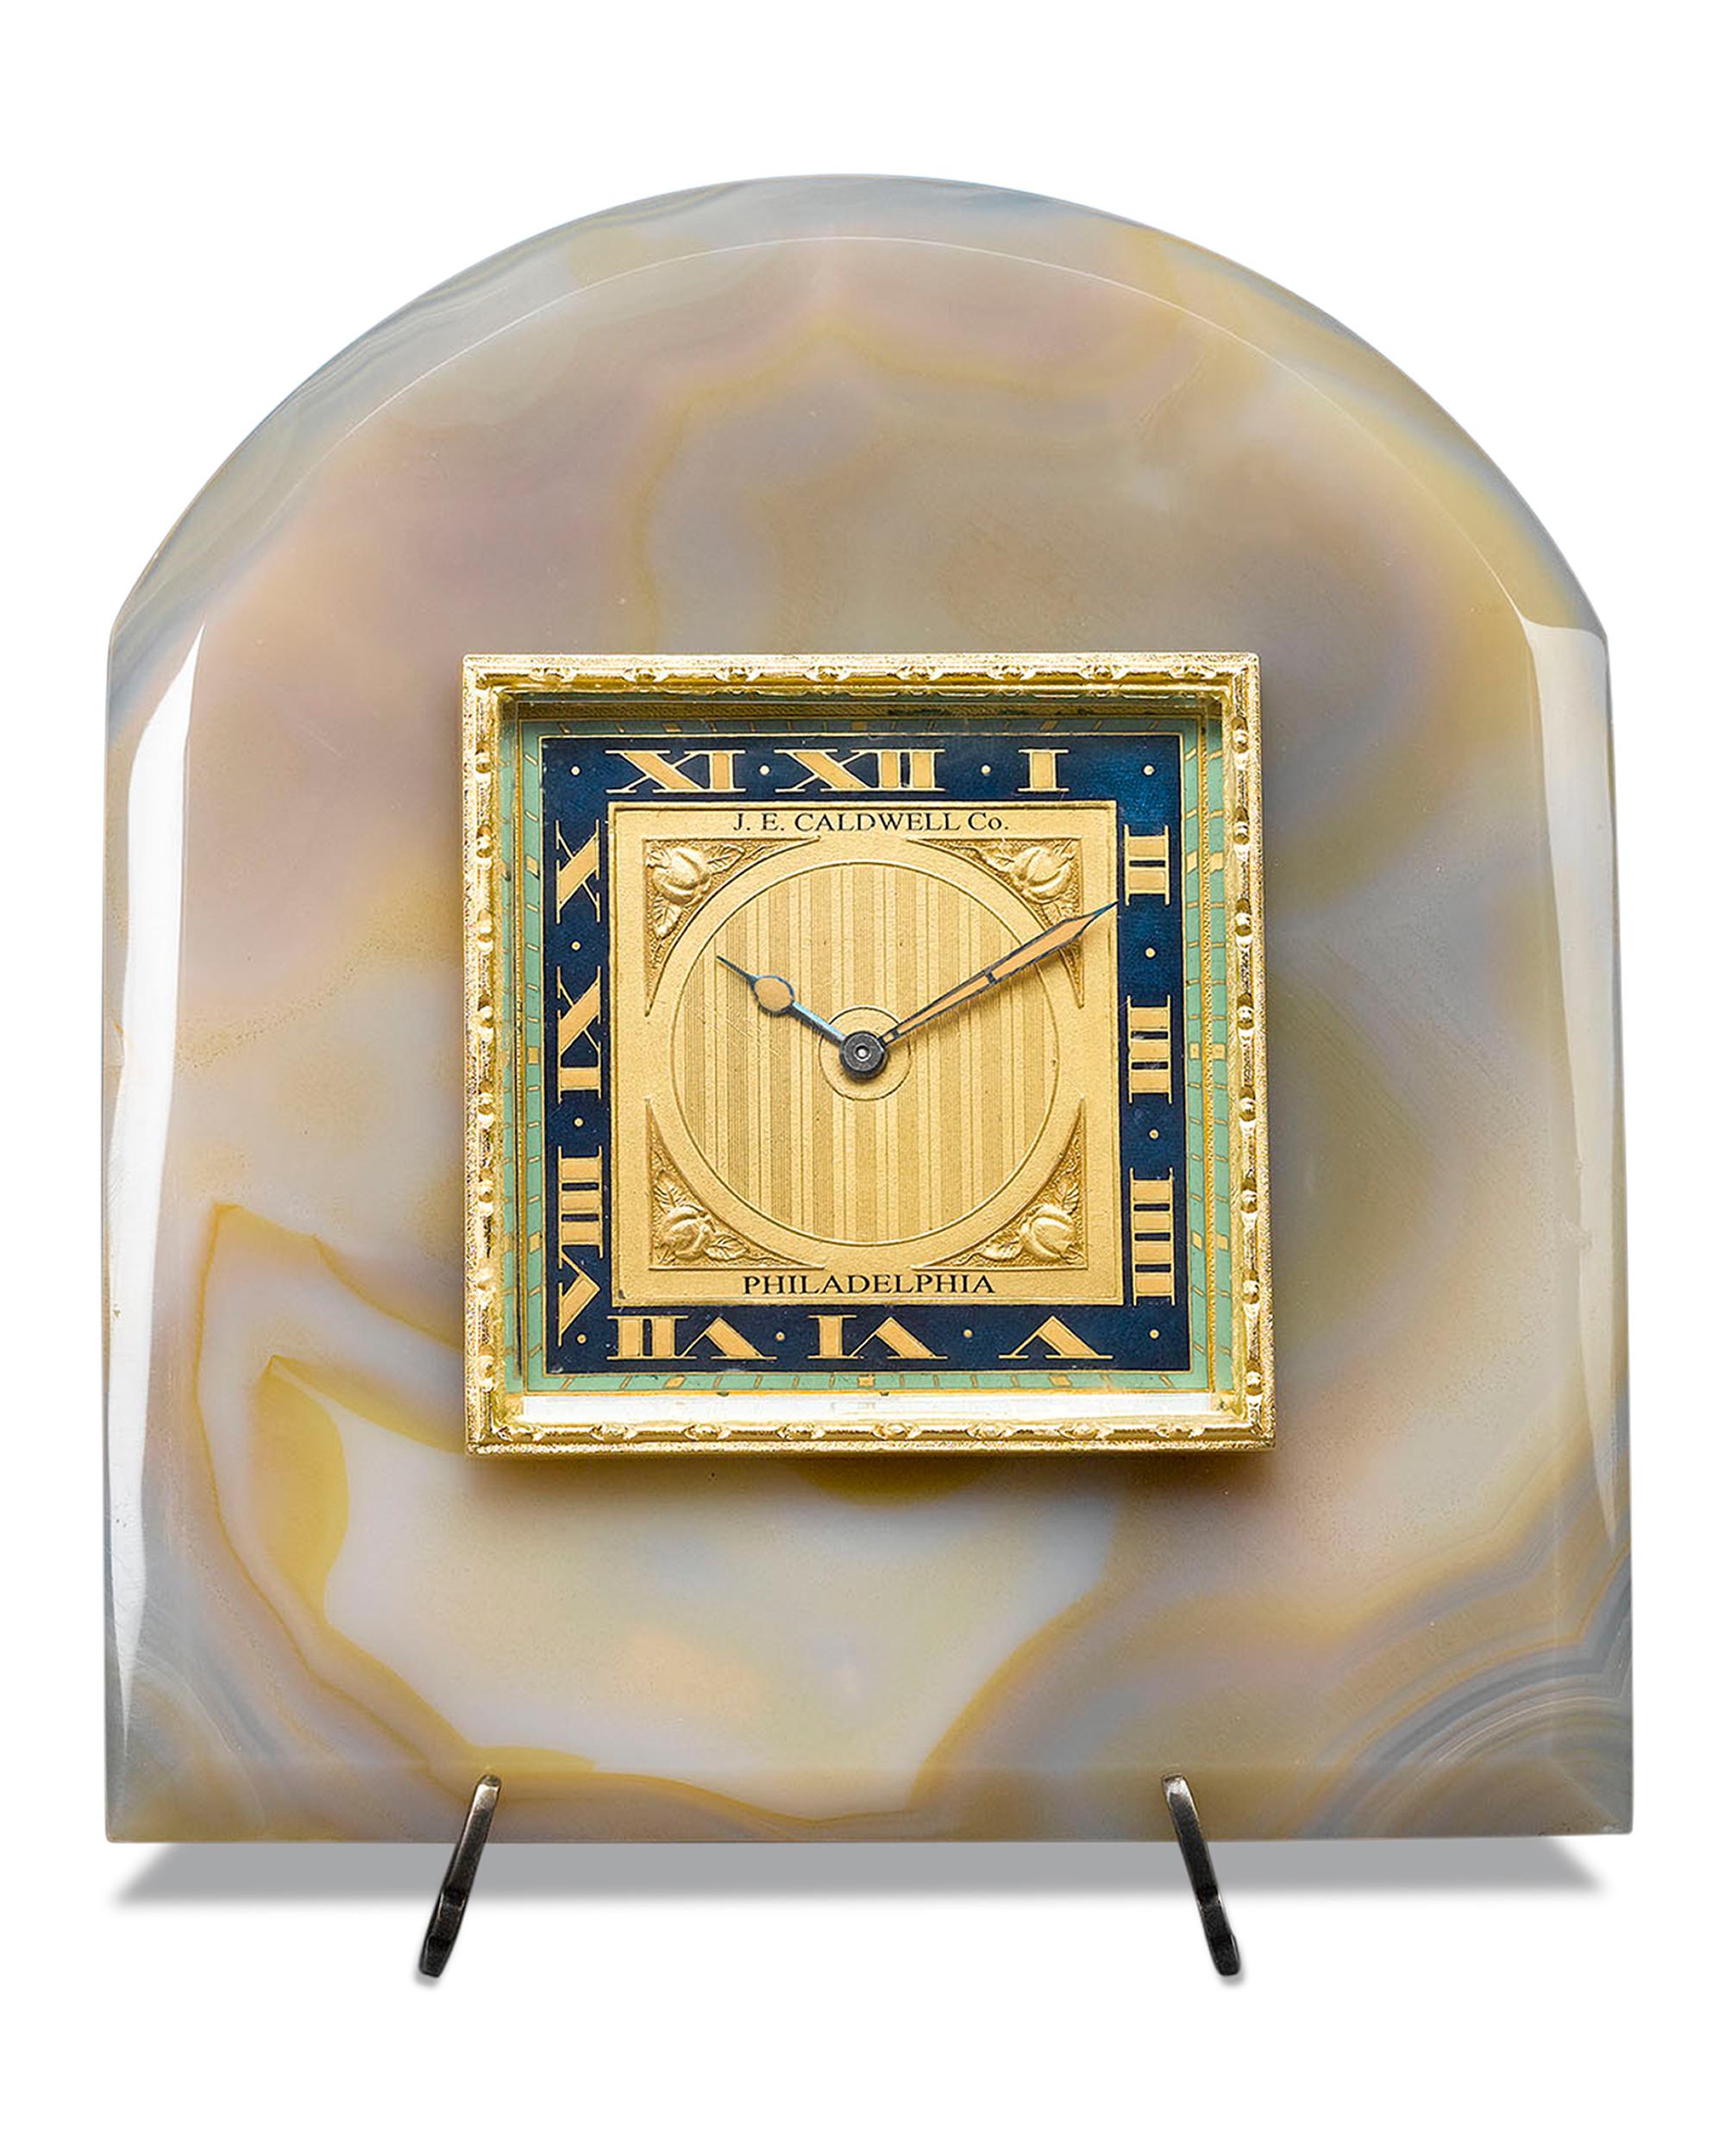 The Art Deco style is beautifully executed in this enchanting desk clock by J.E. Caldwell. The gilded dial, beautifully enameled in midnight blue and celadon green, sports four perfect apples in relief at its corners, and is framed by a luxurious